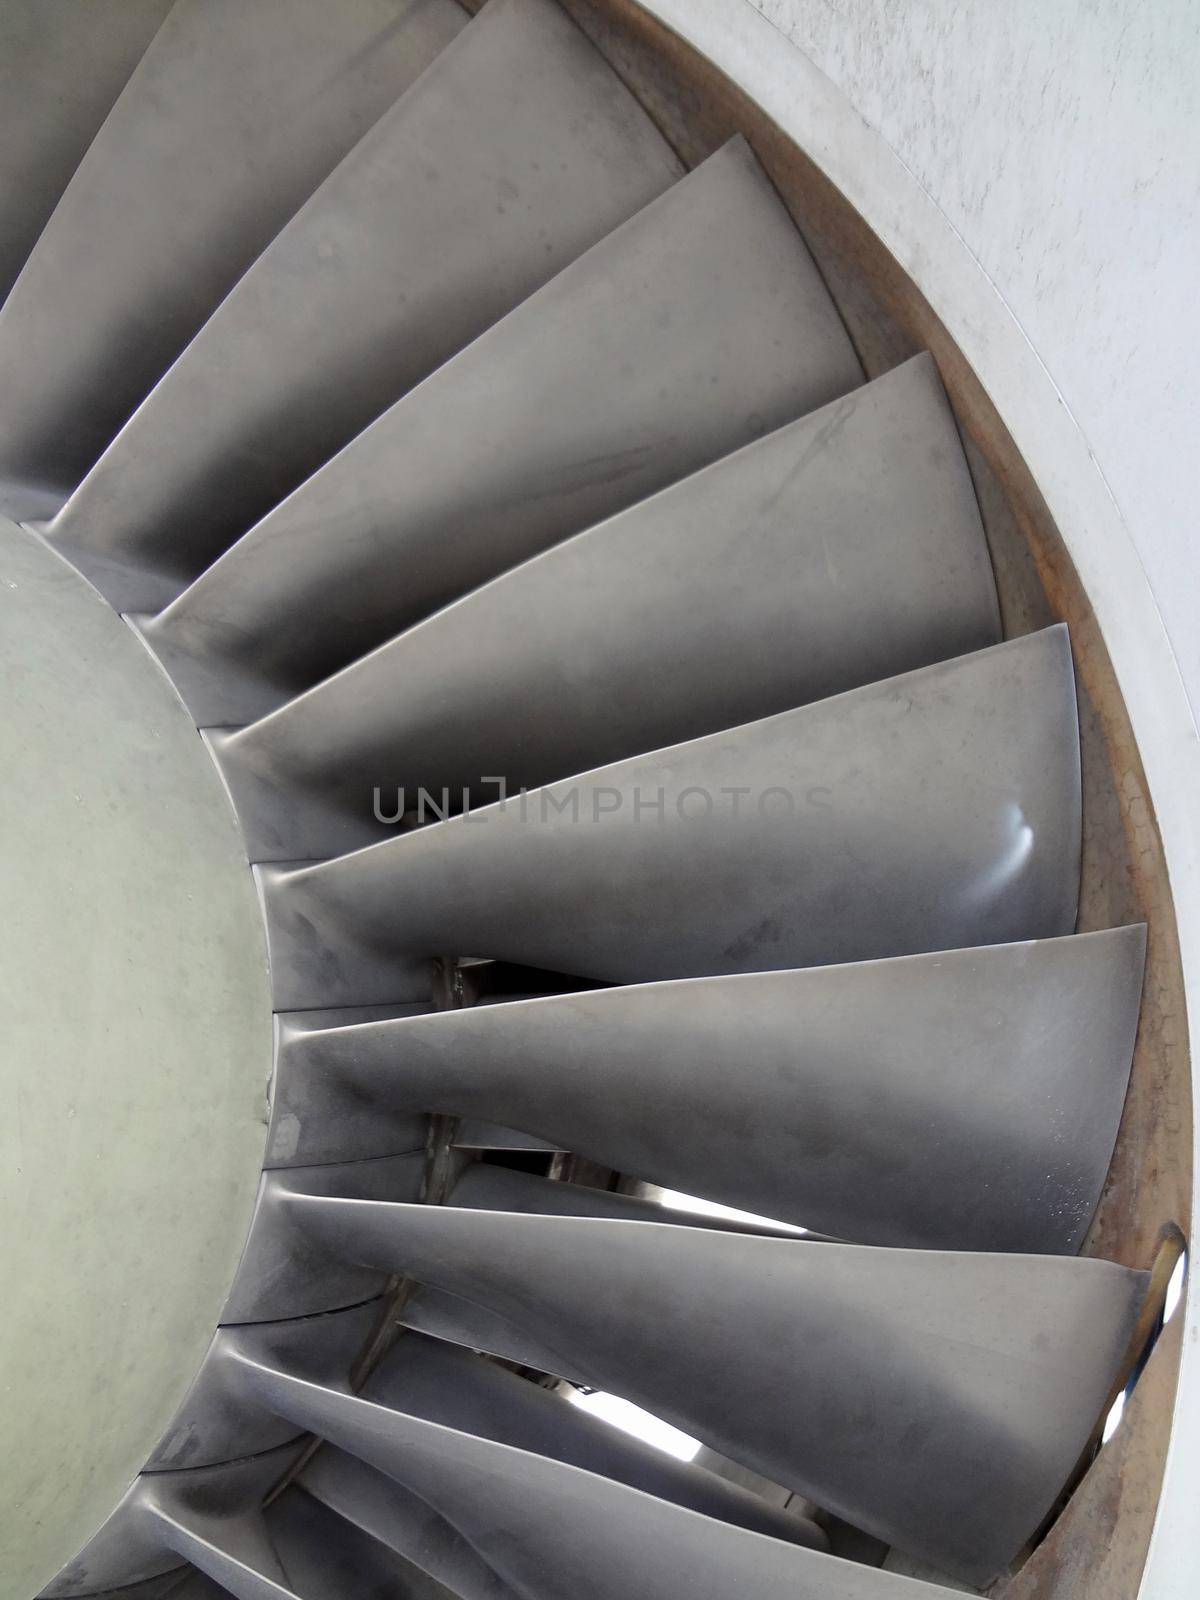 Close up of turbine and fan blades of a fighter jet engine with signs of wear.